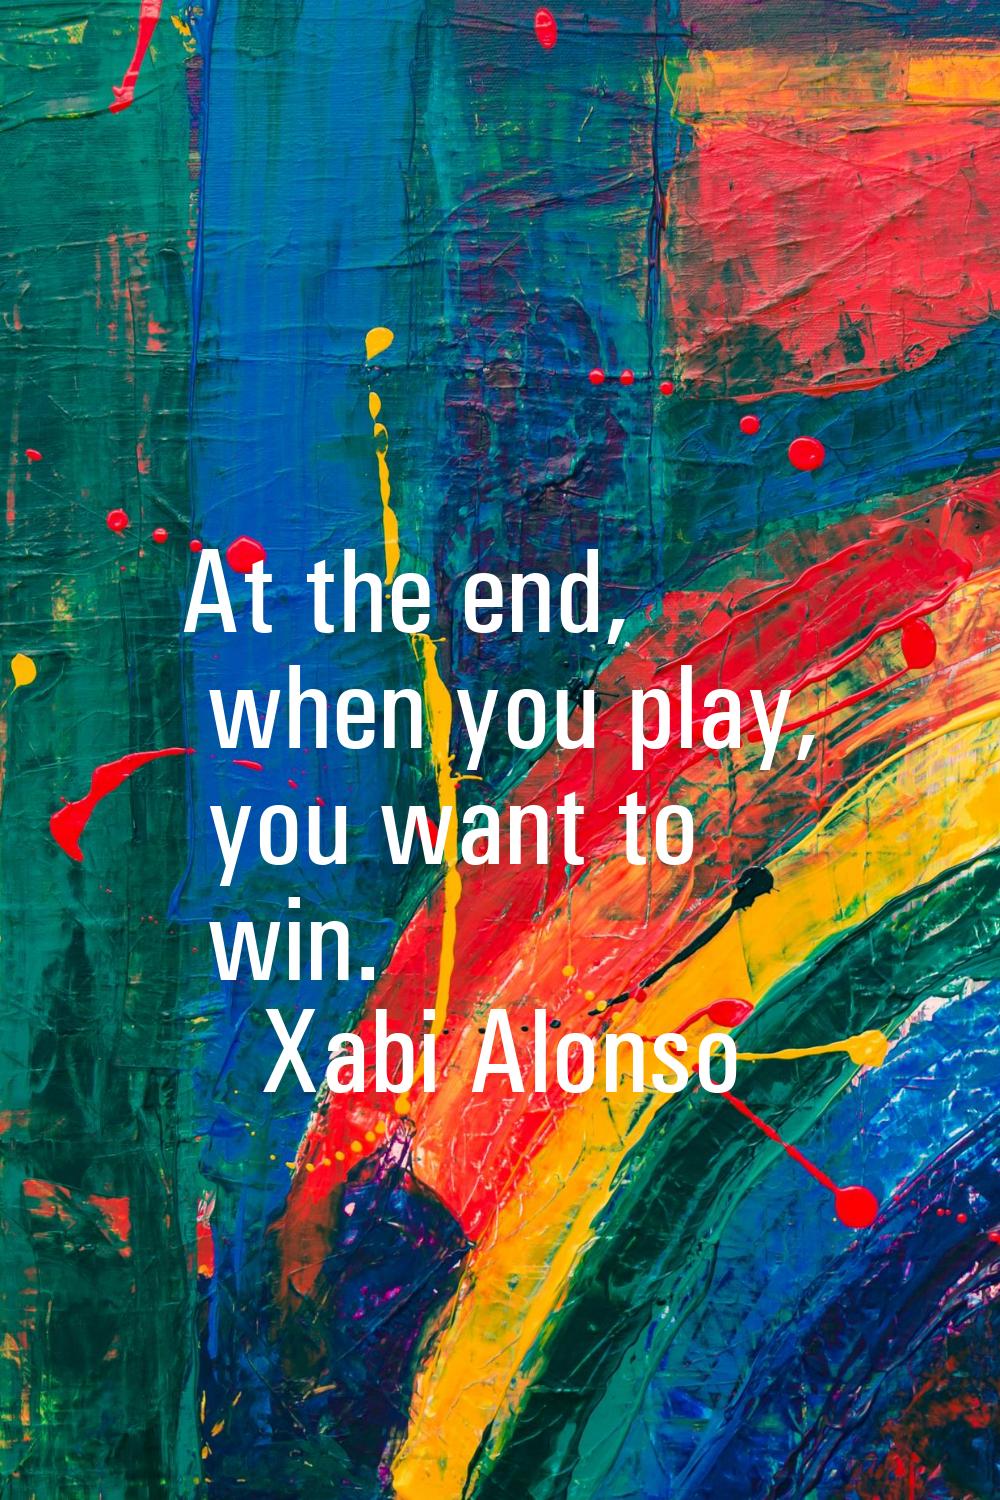 At the end, when you play, you want to win.